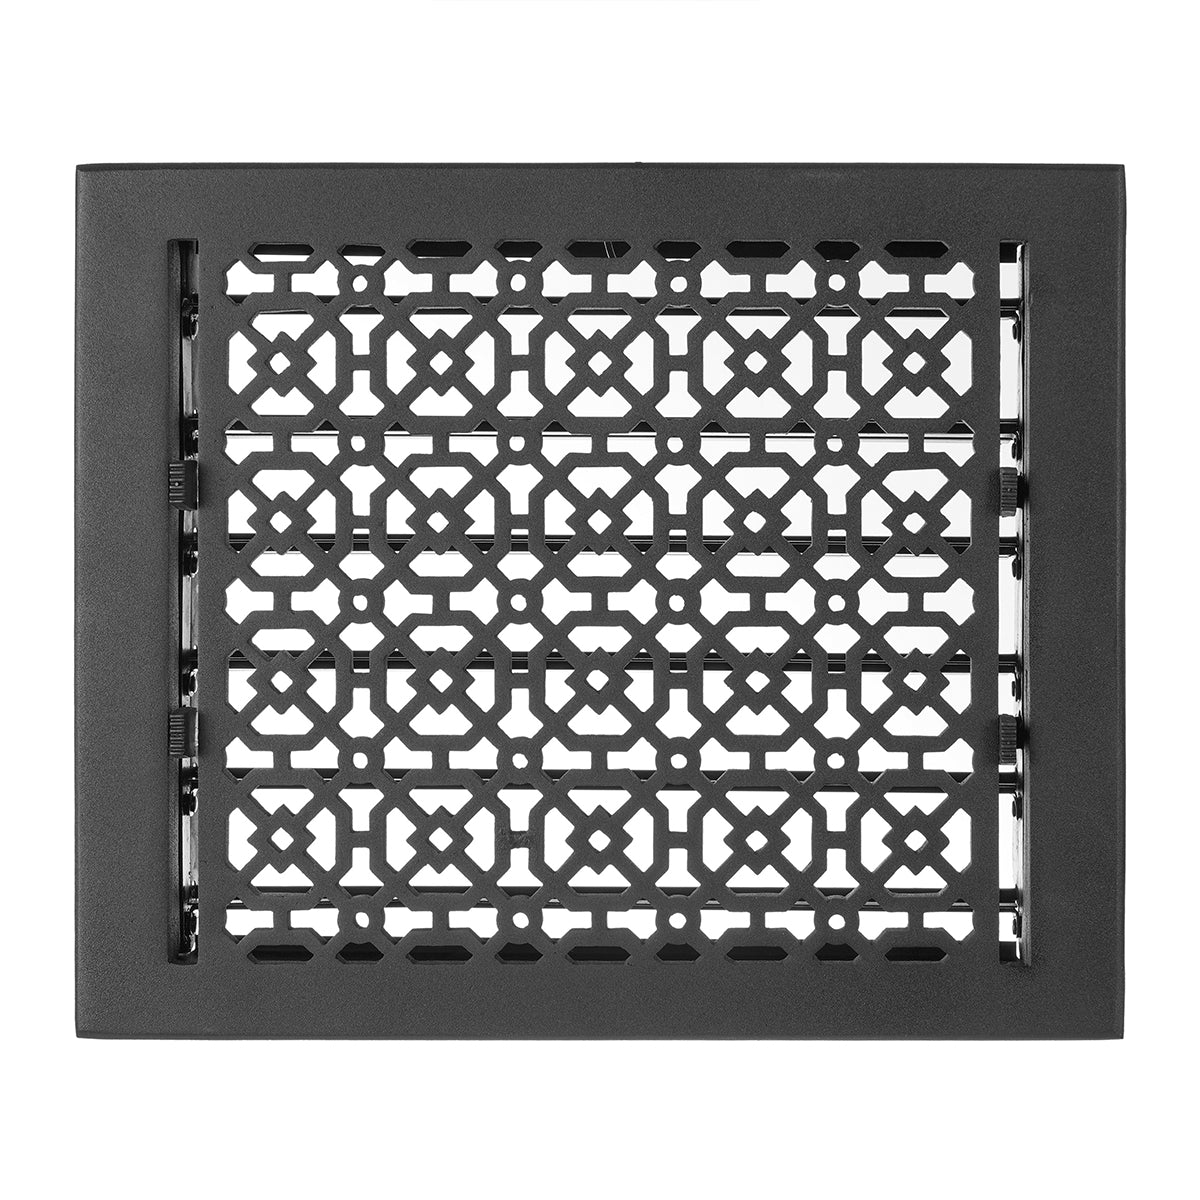 Achtek Air Supply Vent 10"x 12" Duct Opening (Overall 11-1/2"x 13-3/4"") Solid Cast Aluminium Register Cover | Powder Coated